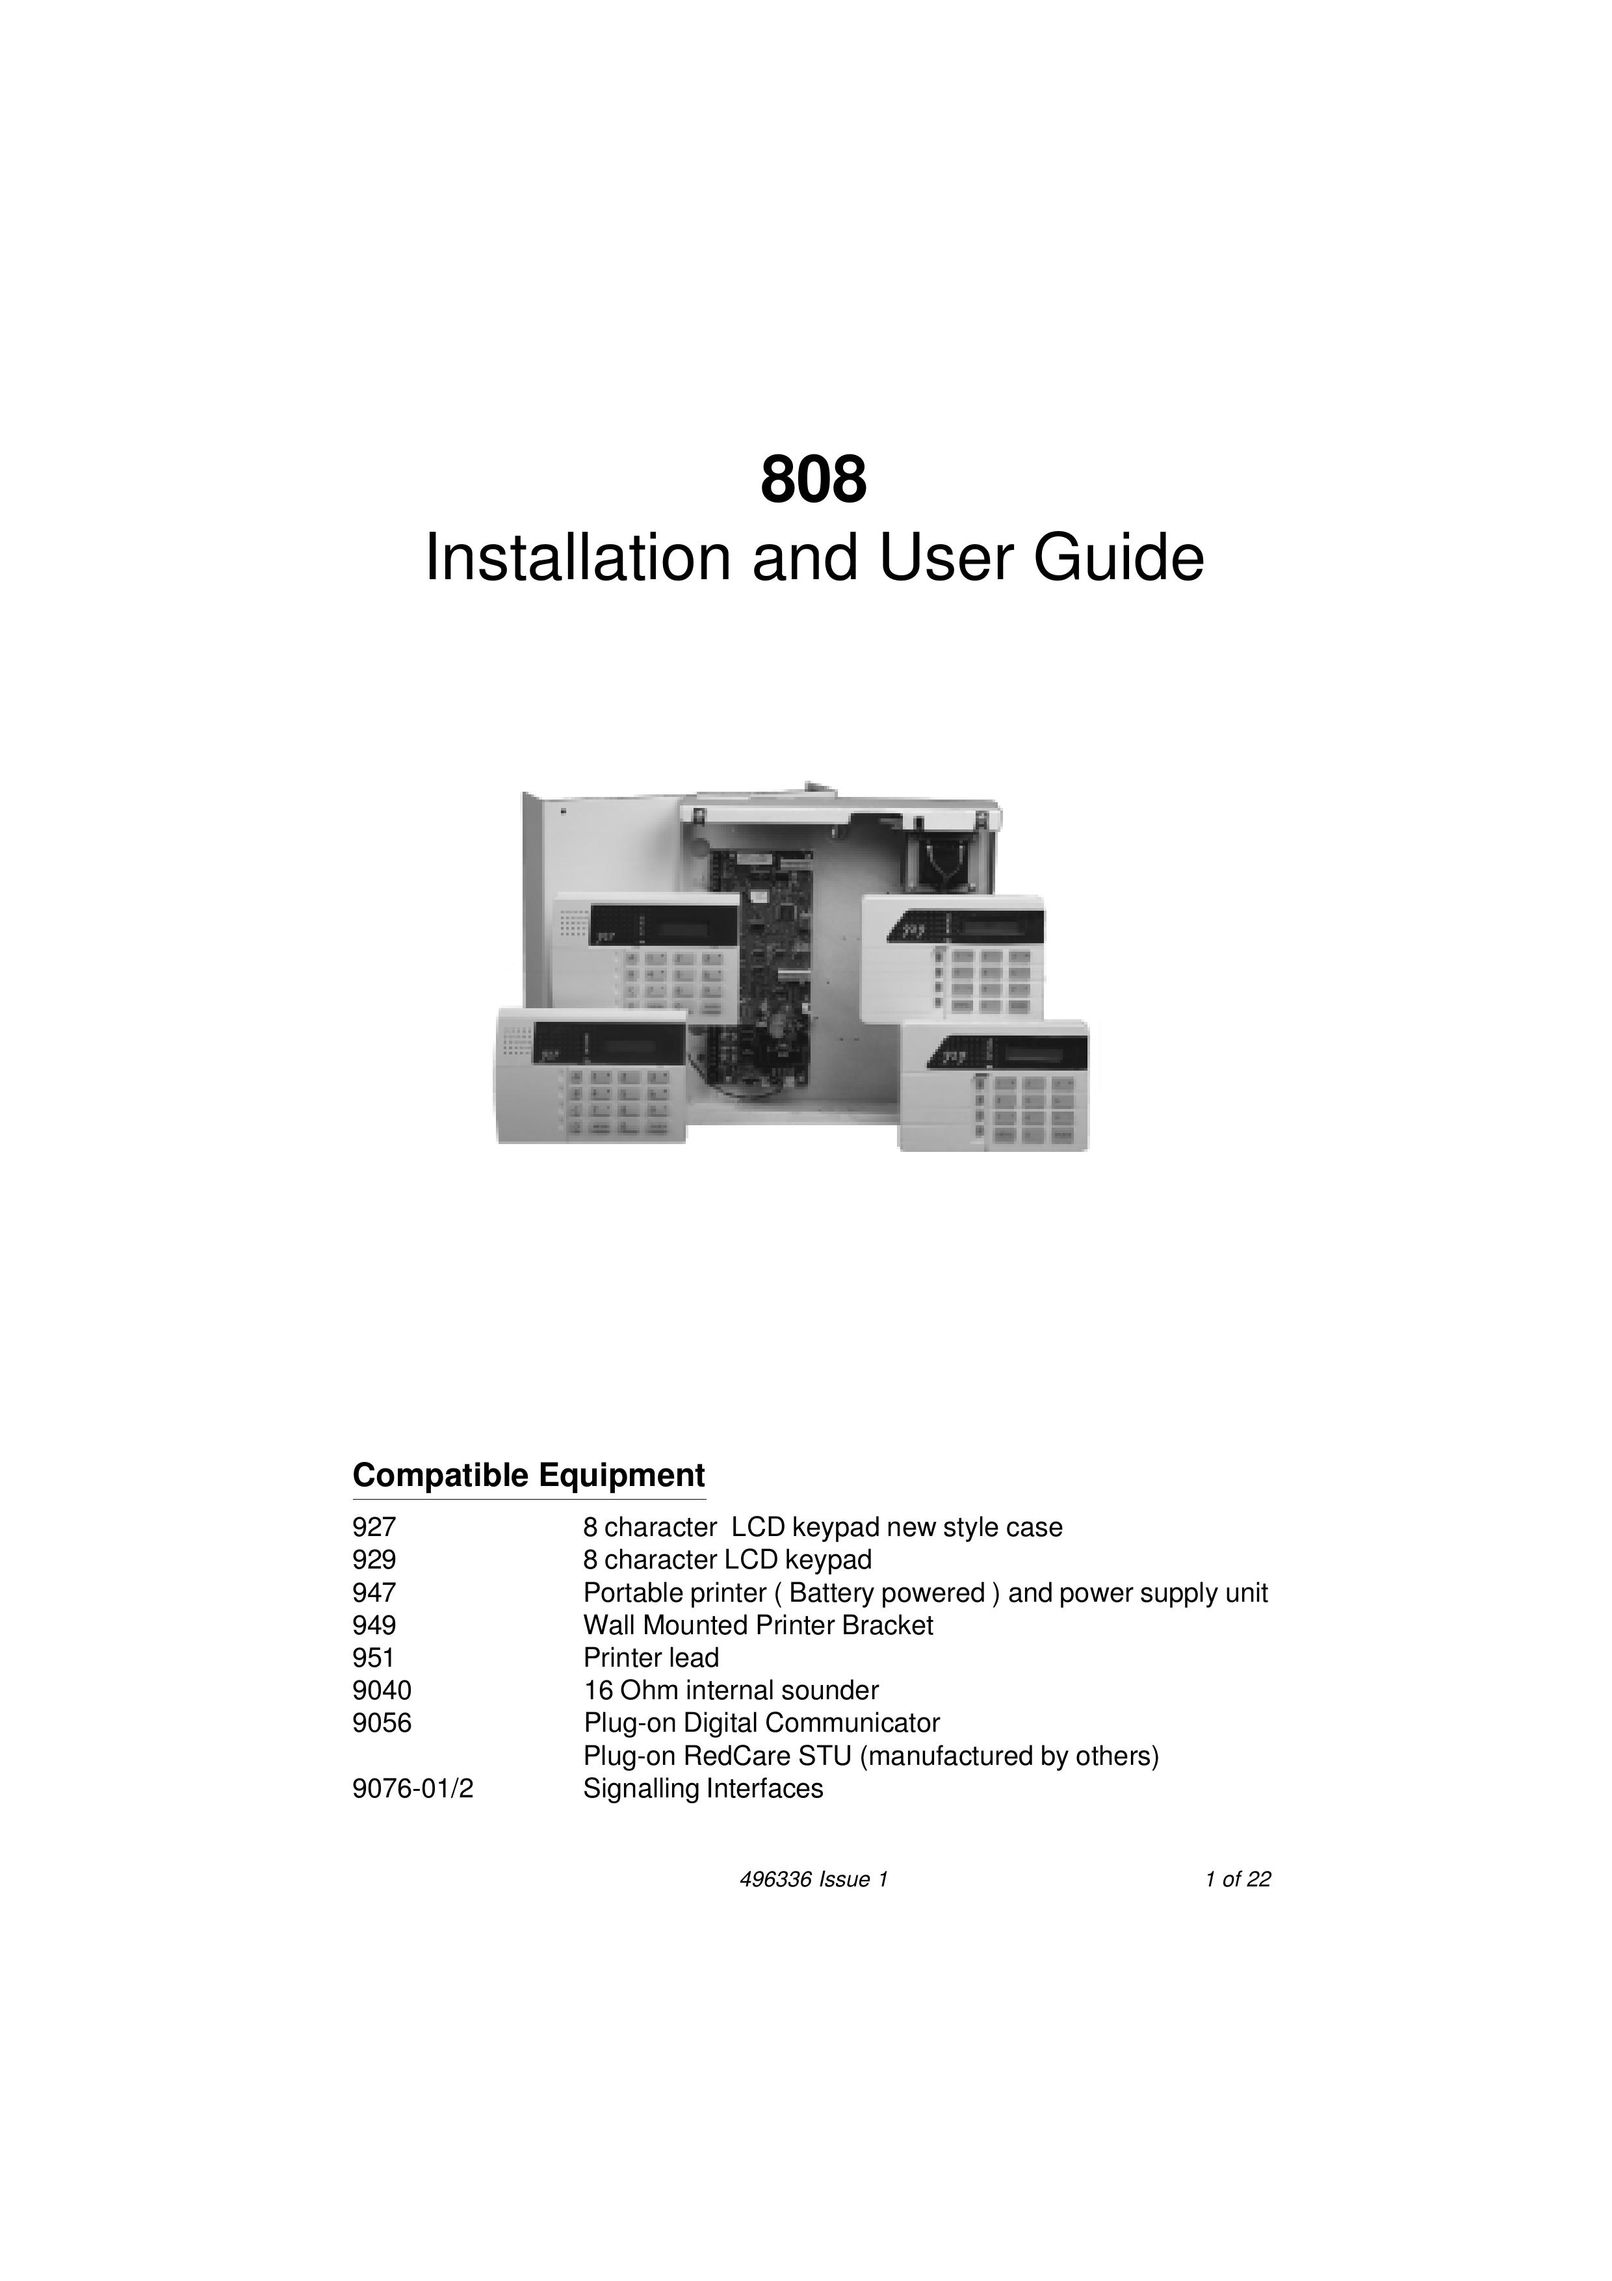 Security Centres 808 Home Security System User Manual